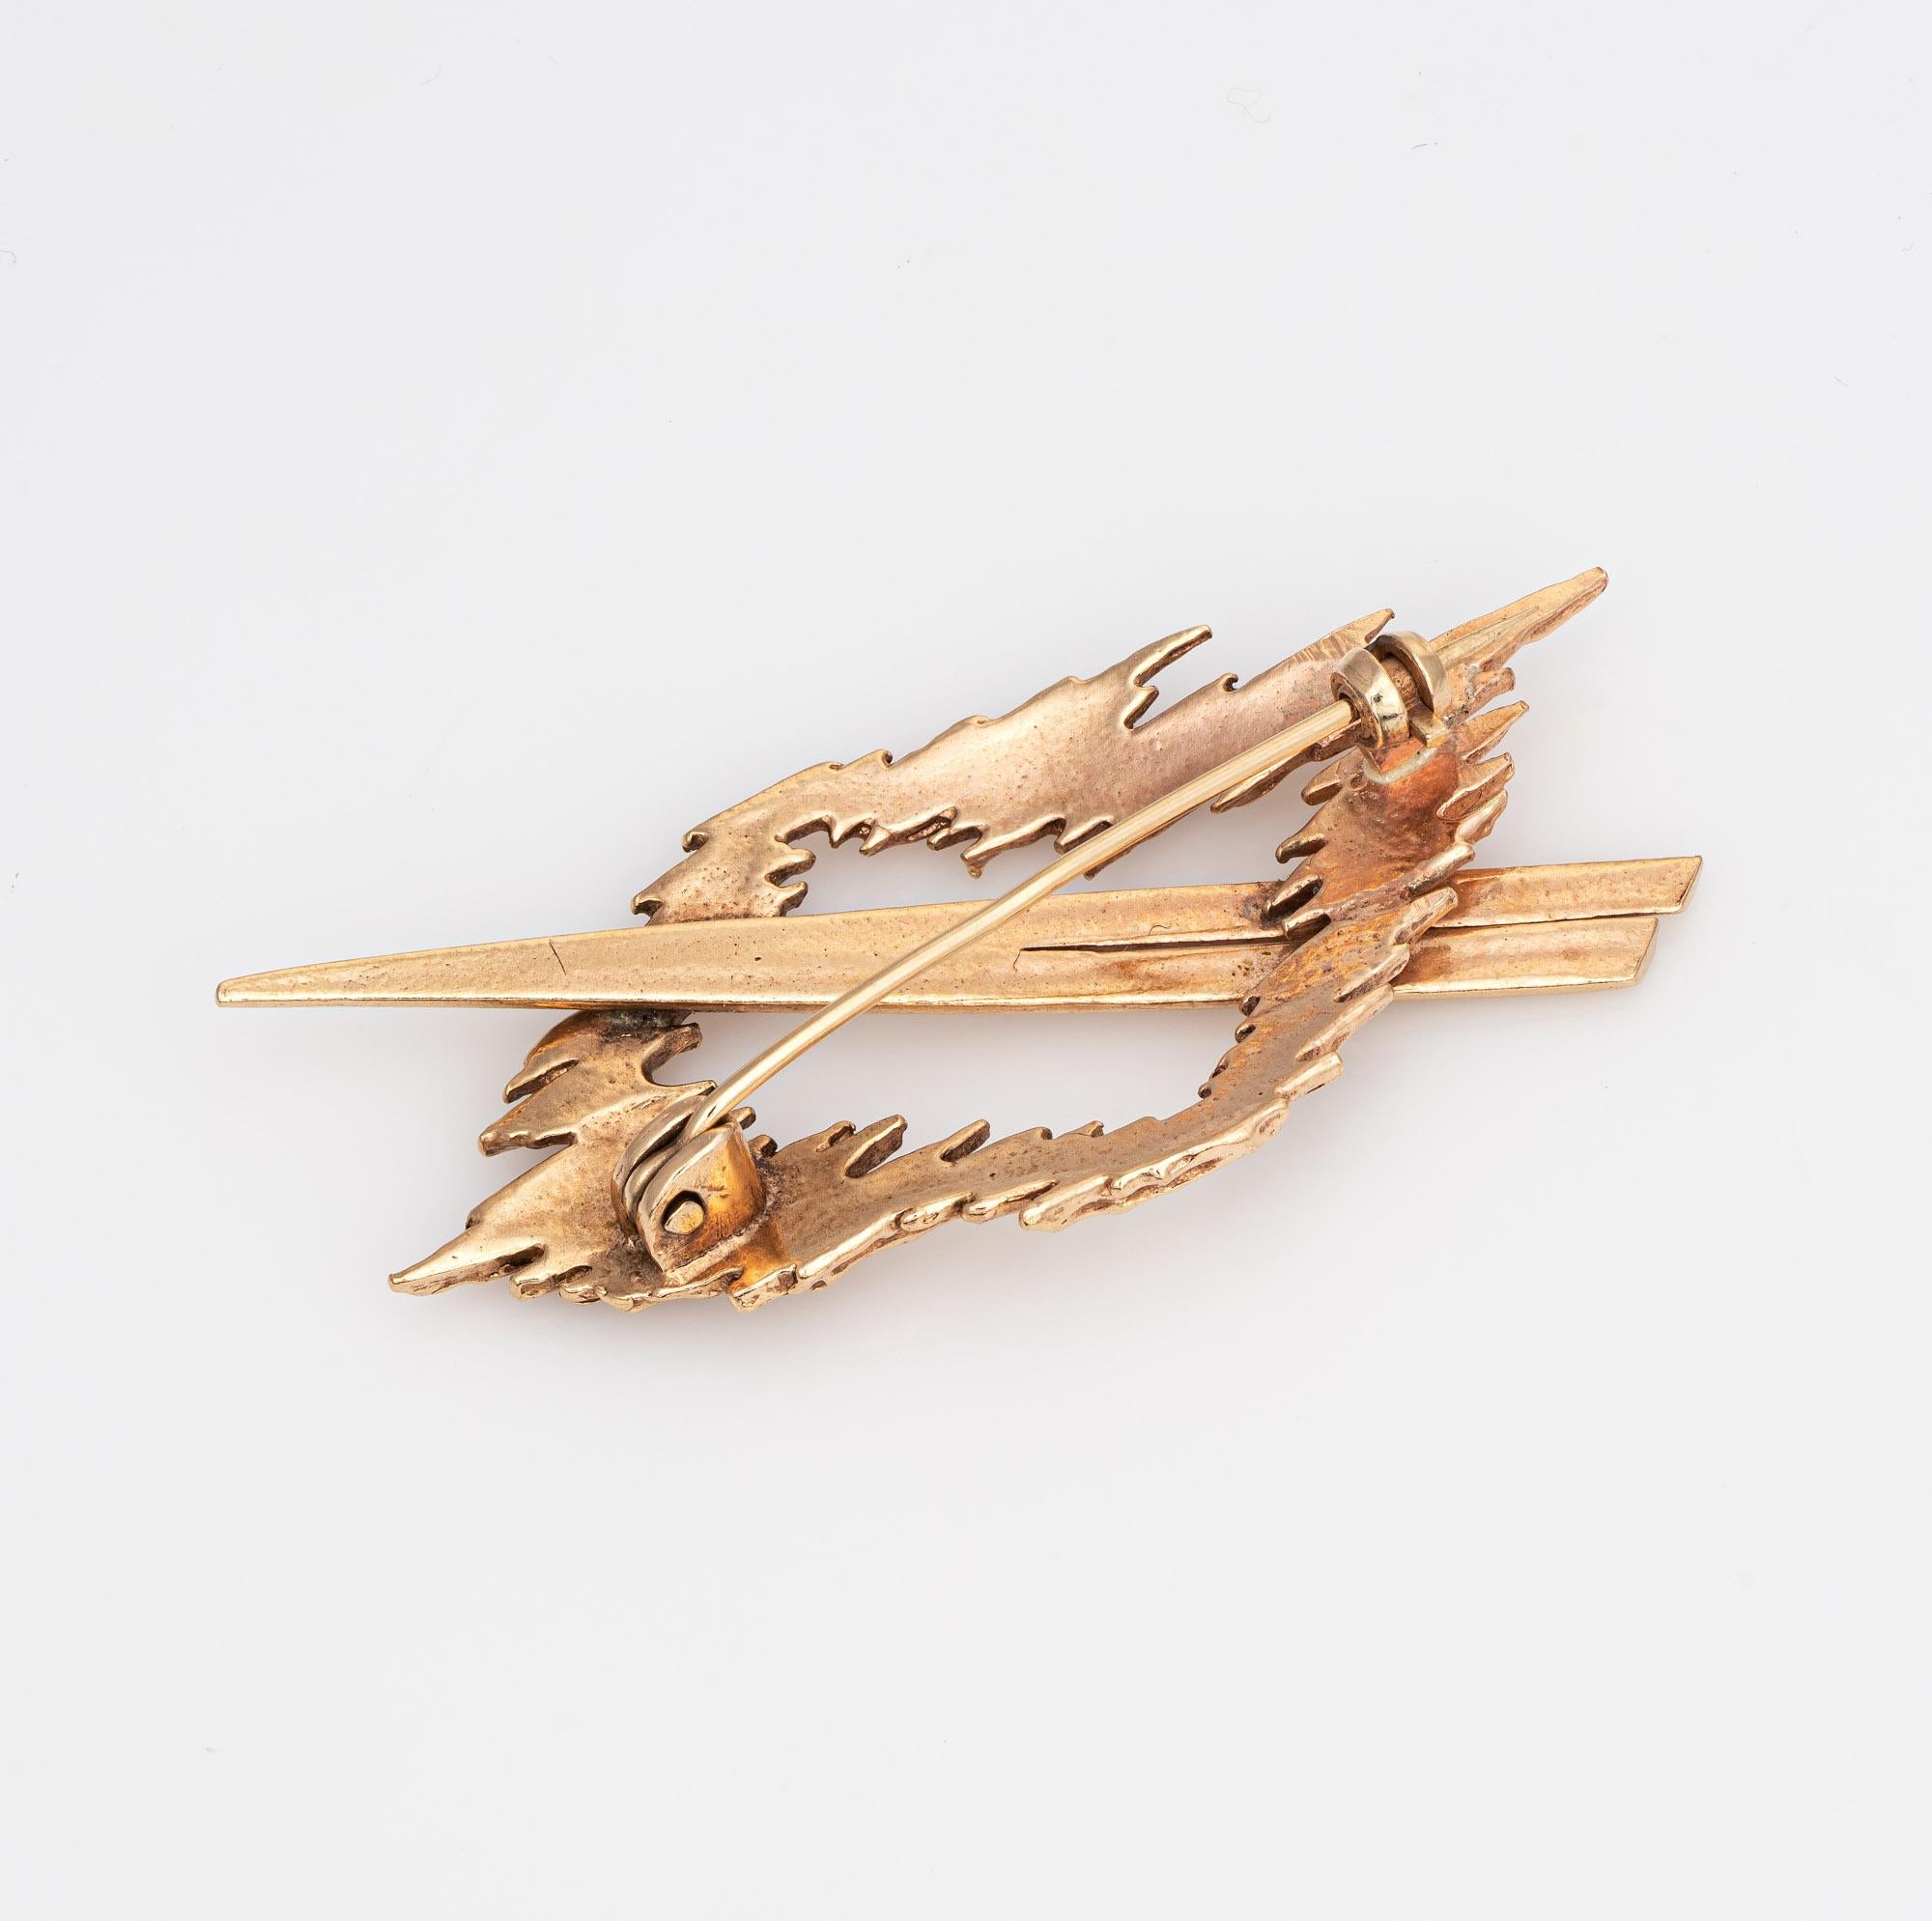 Finely detailed vintage abstract brooch (circa 1950s to 1960s) crafted in 14k yellow gold.  

The brooch highlights a striking brutalist design with a bold, unforgettable look. The organic like design was popular during the 1950s and 1960s. The